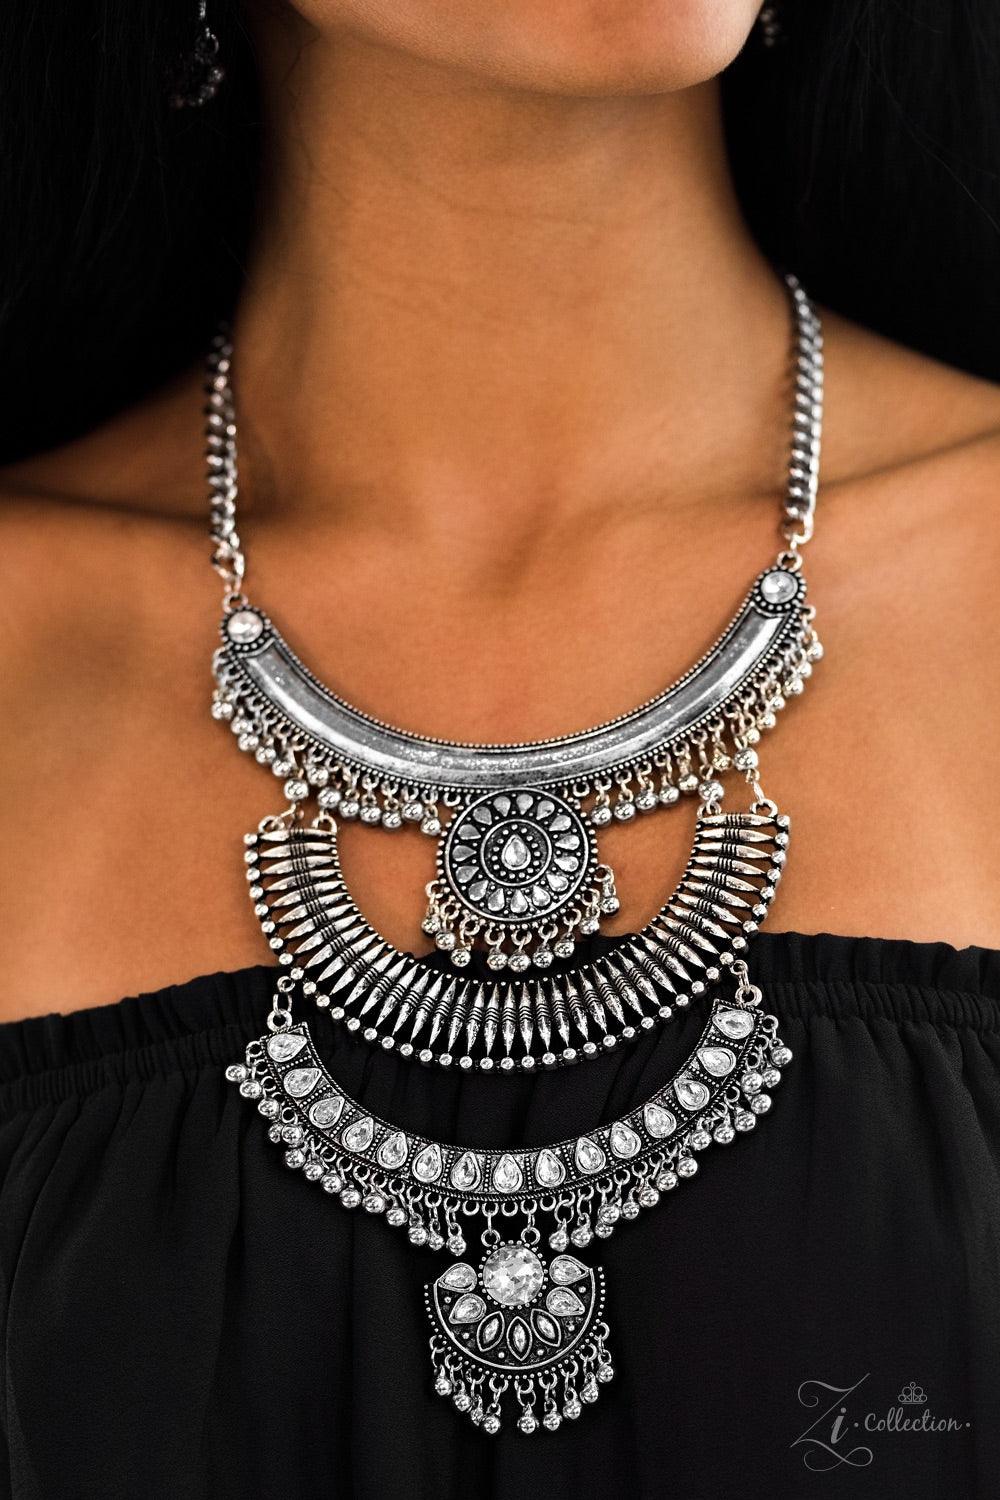 Paparazzi Accessories Legend Three oversized crescent plates connect vertically down the chest, creating a dramatically stacked pendant. Infused with shimmery tribal patterns and layers of flirty beaded fringe, glittery white rhinestones are haphazardly p